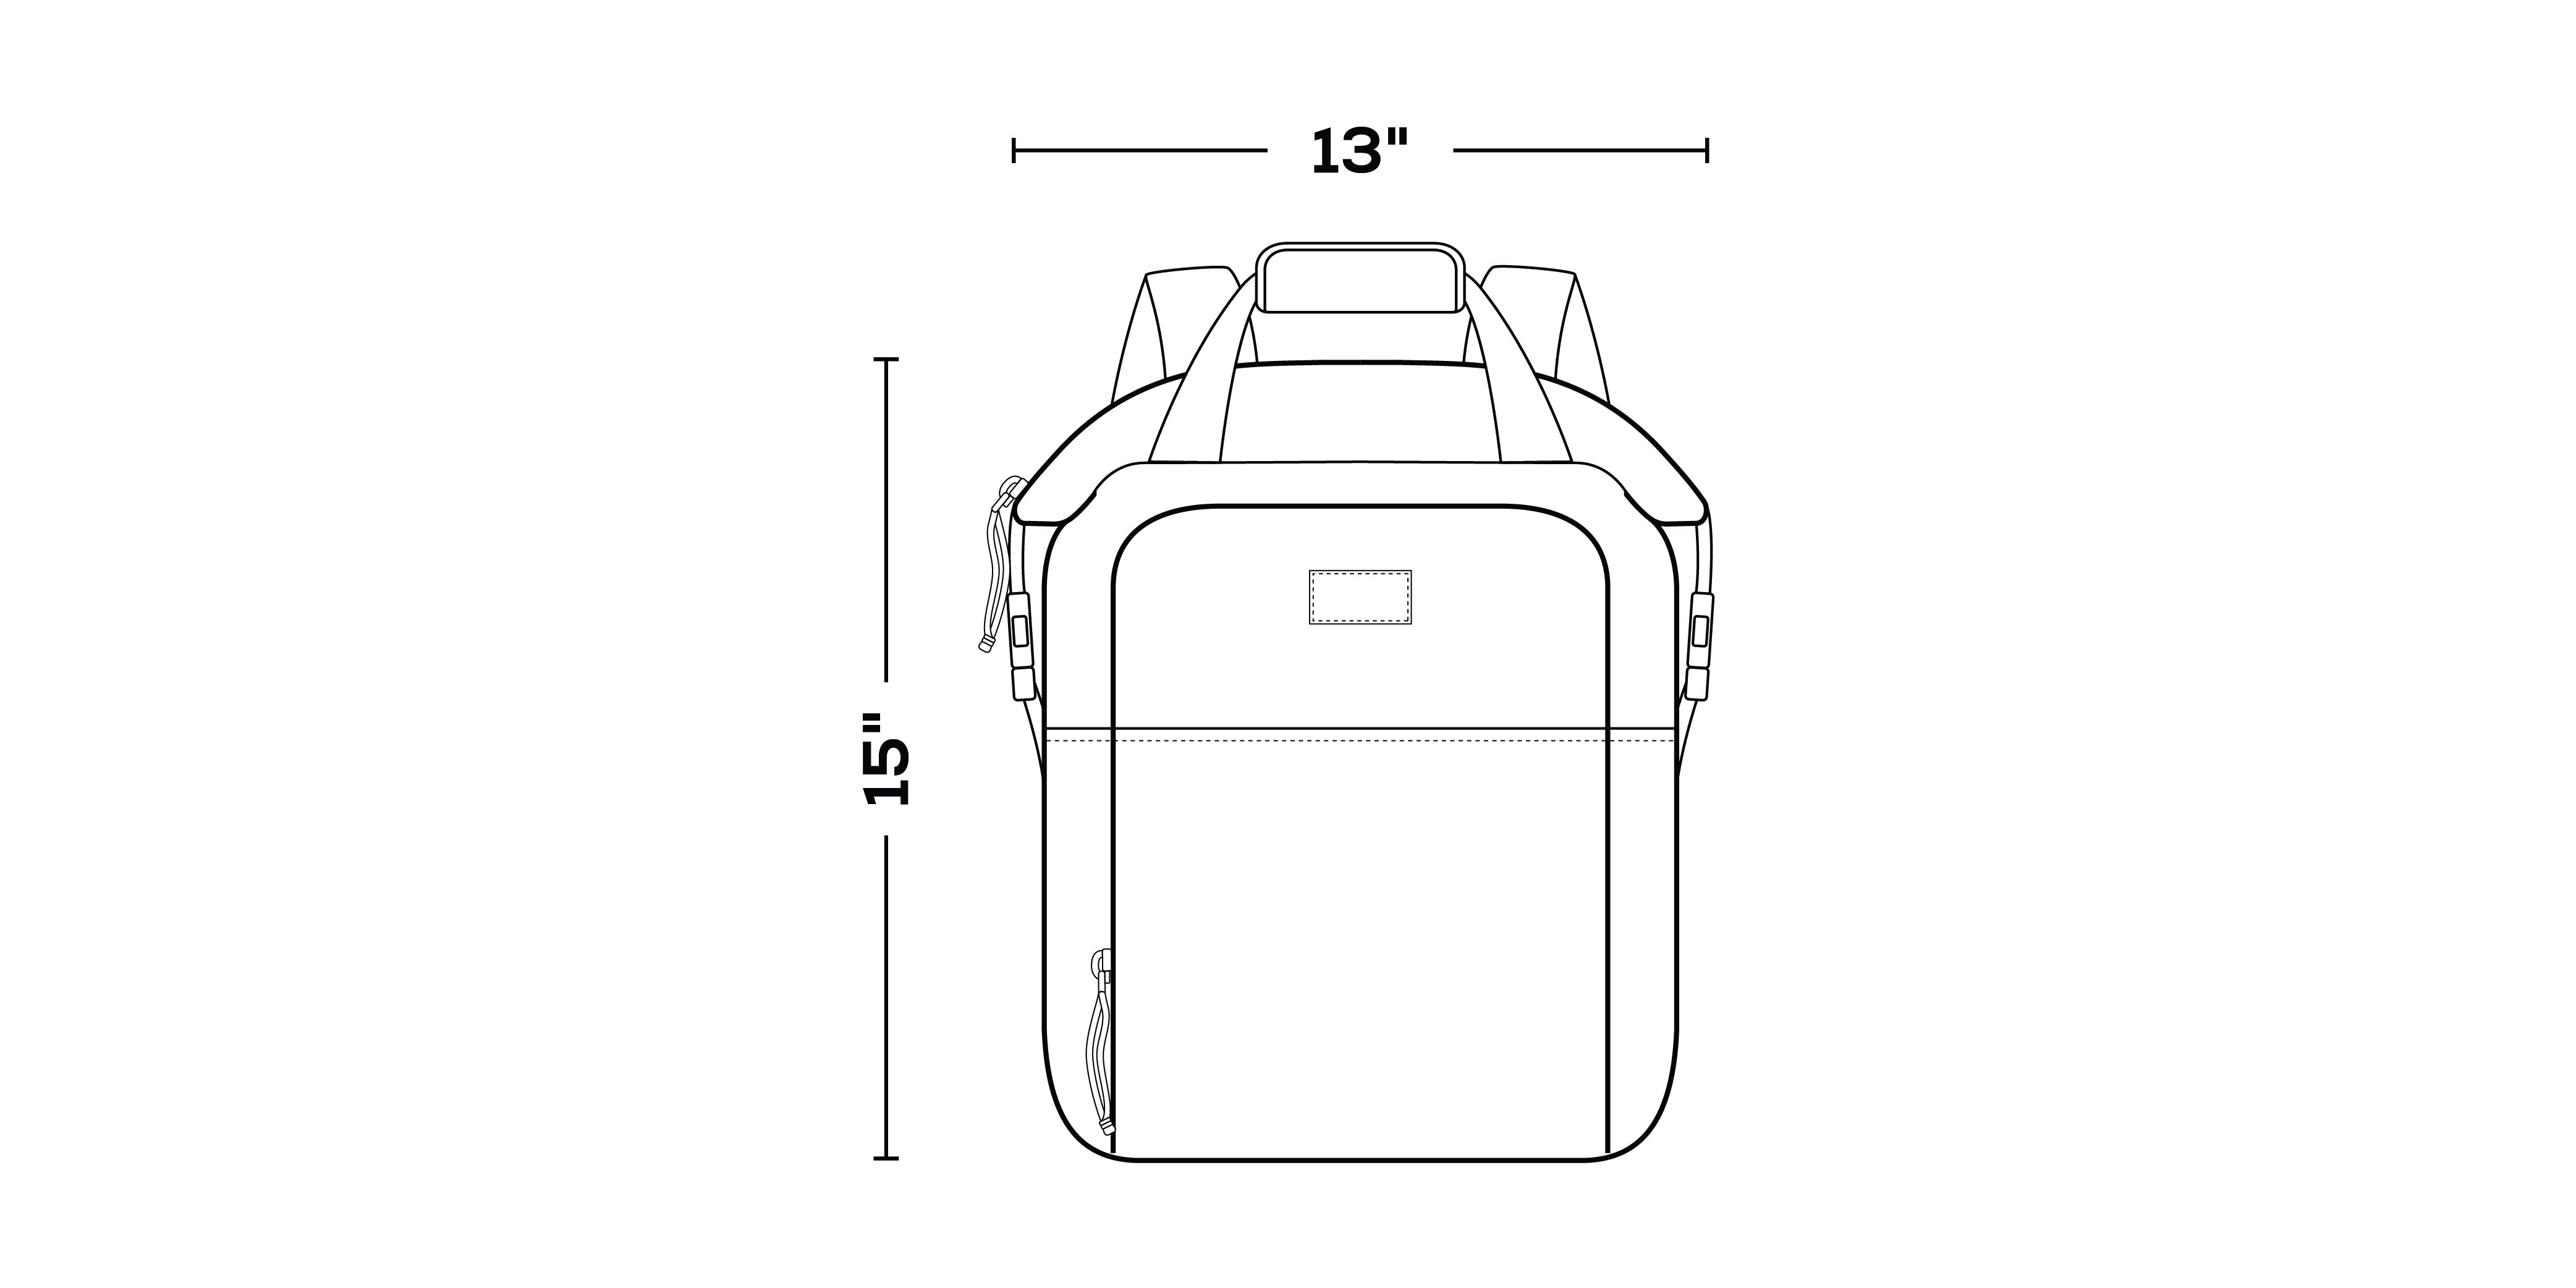 Switch 30-Can Backpack dimensions